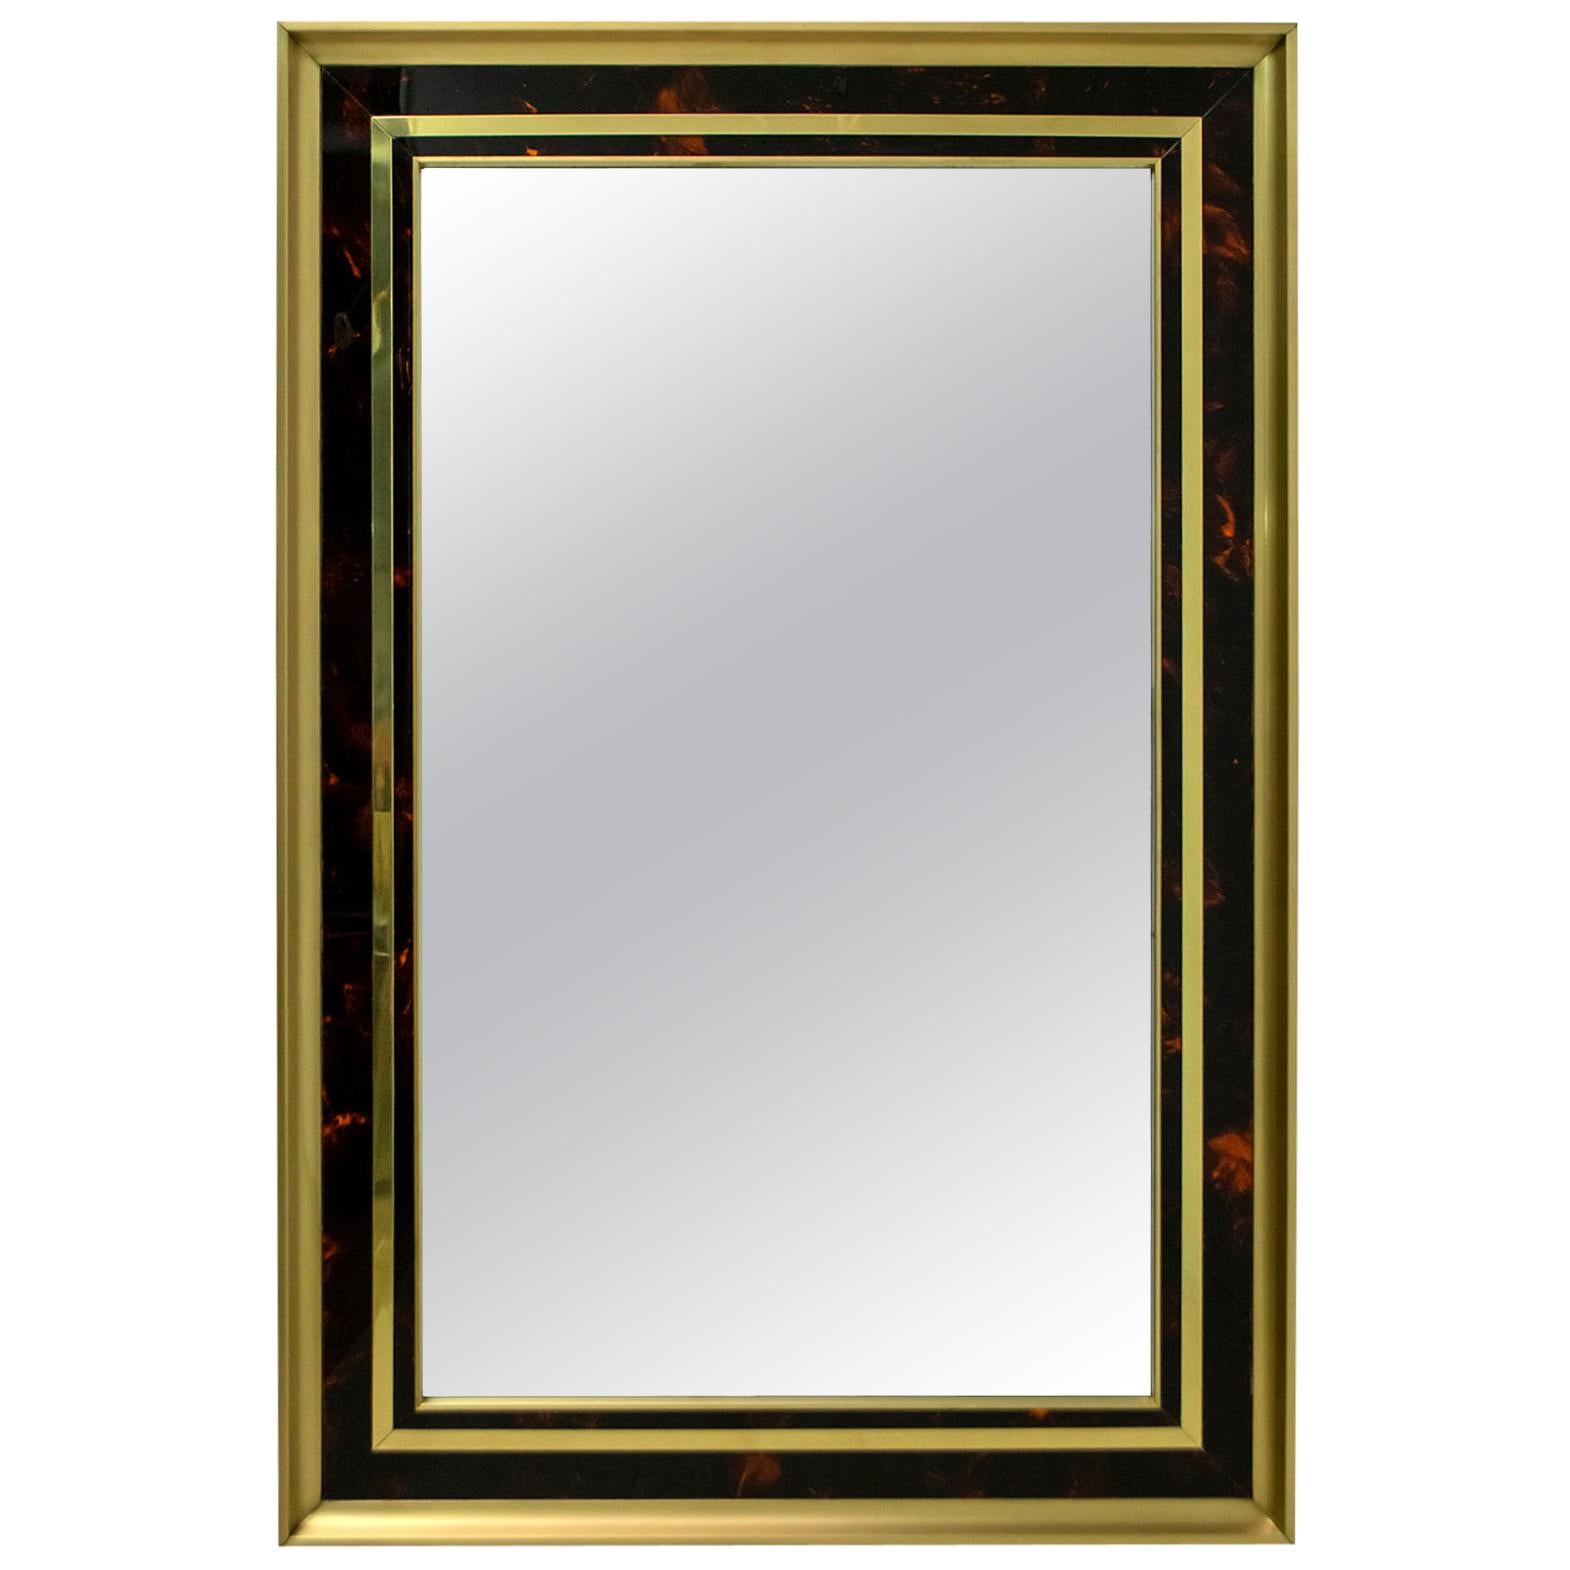 Sandro Petti Midcentury Italian Brass and Celluloid Mirror by "Metal Art", 1970s For Sale